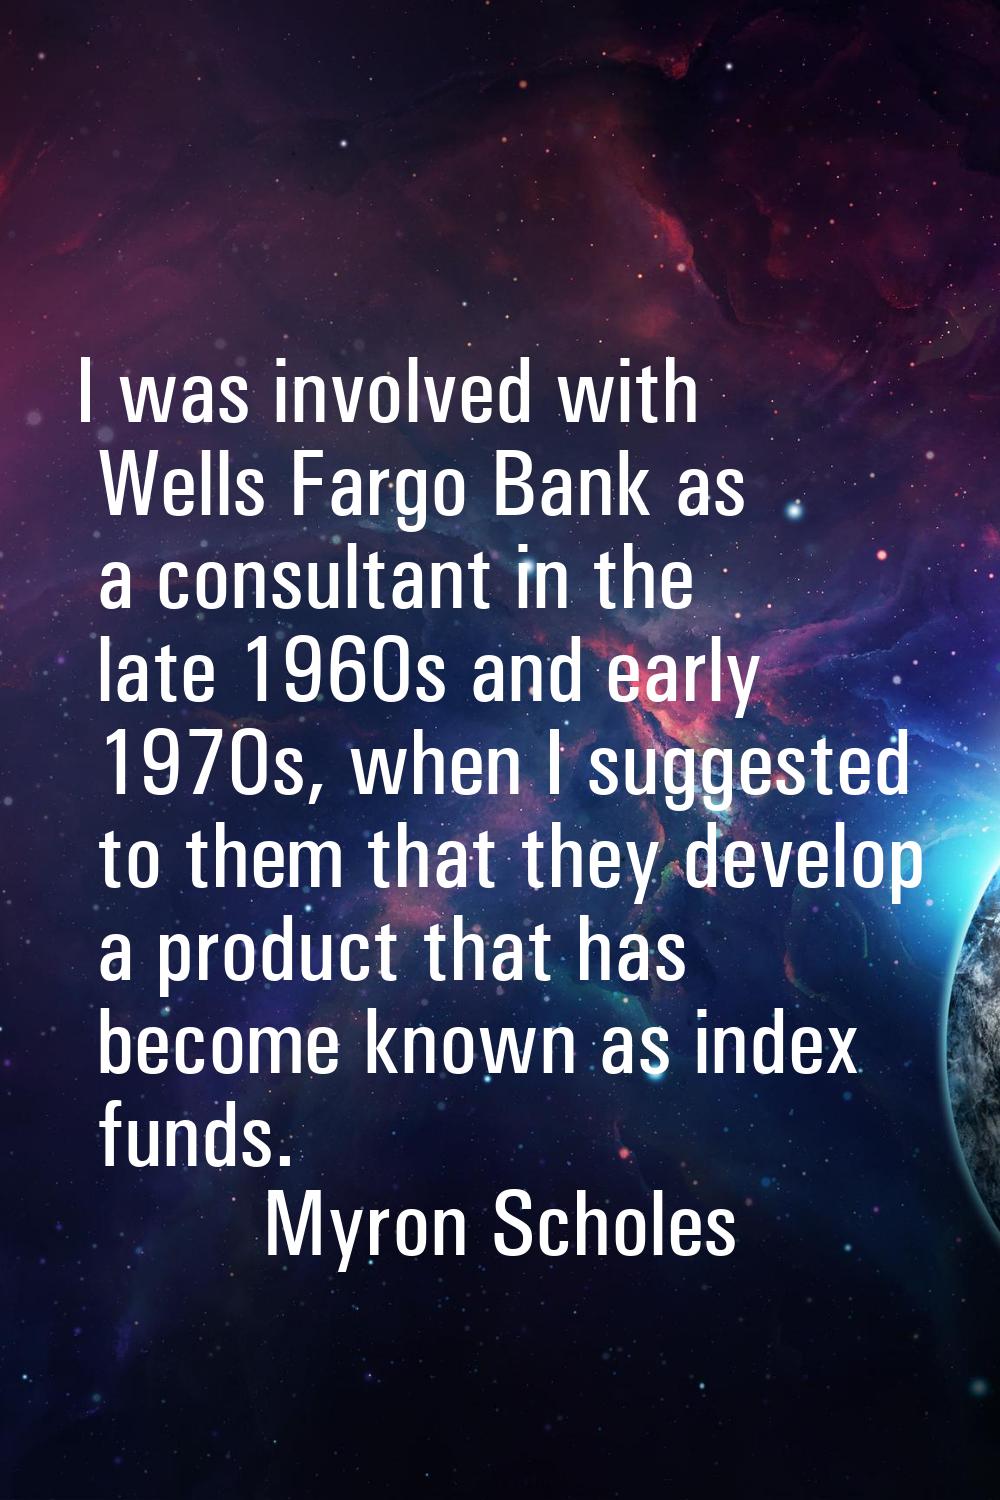 I was involved with Wells Fargo Bank as a consultant in the late 1960s and early 1970s, when I sugg